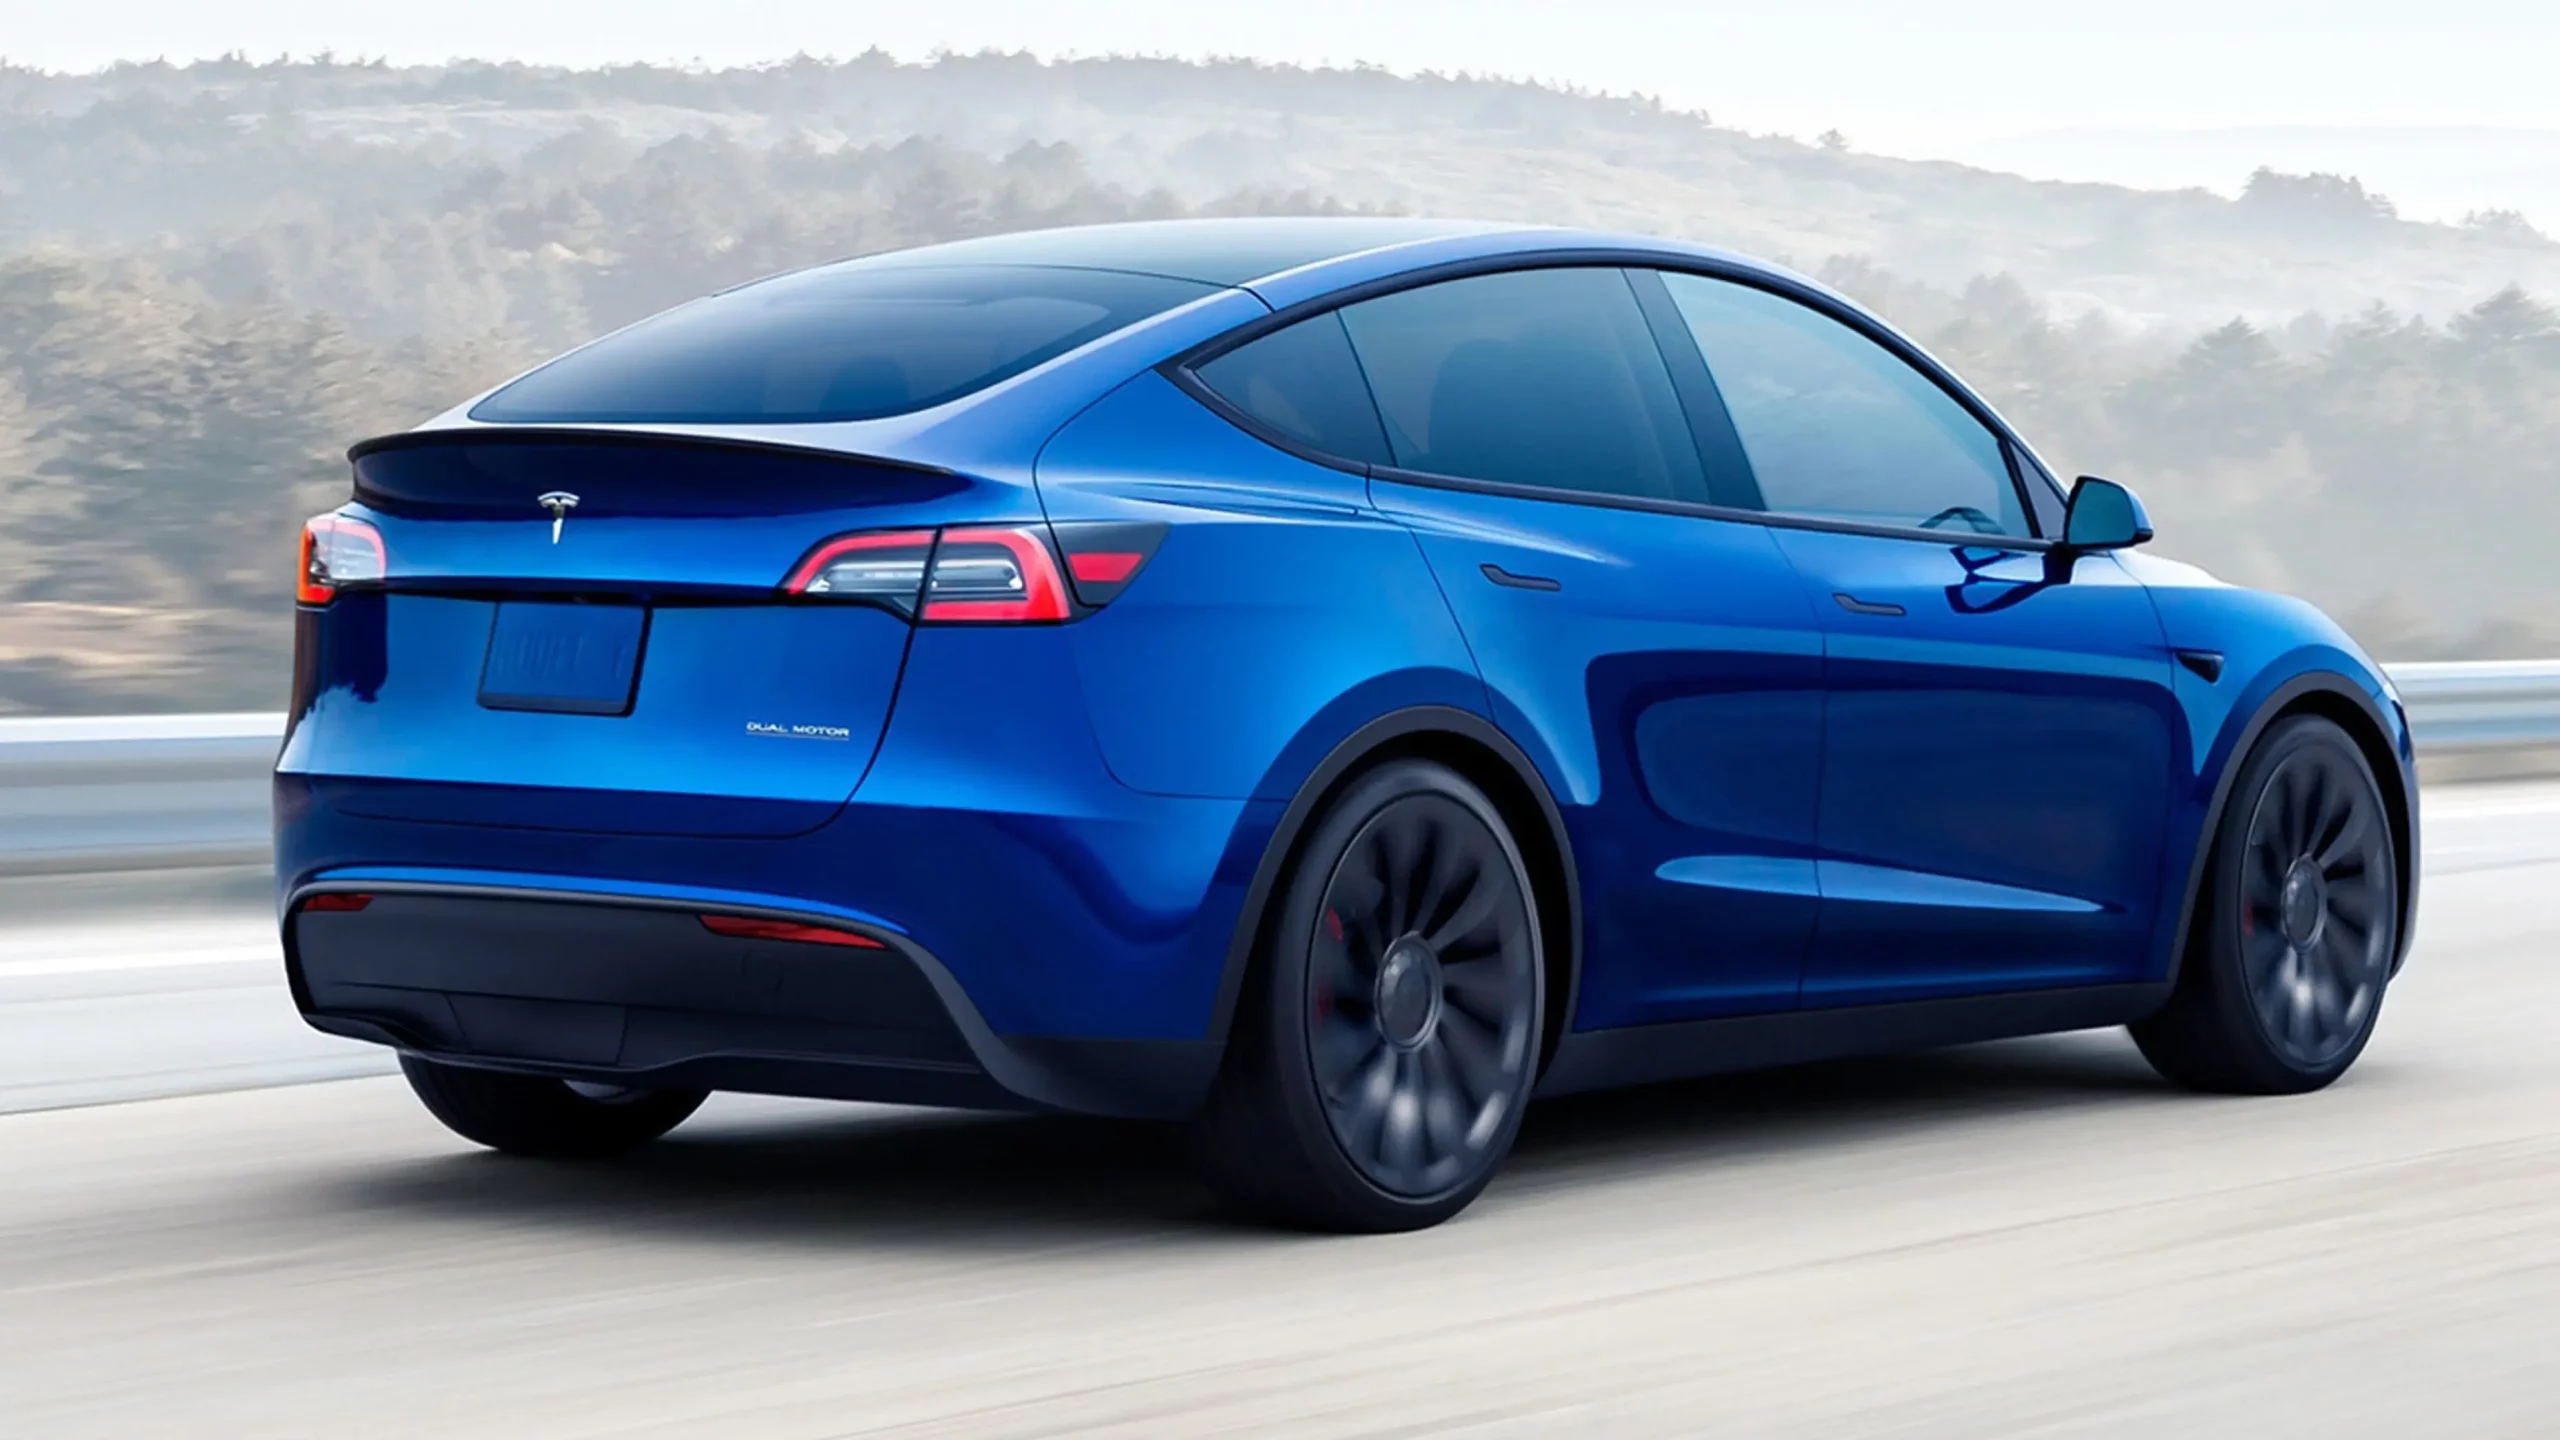 New entry-level BYD-powered Tesla Model Y approved by the EU - Drive Tesla